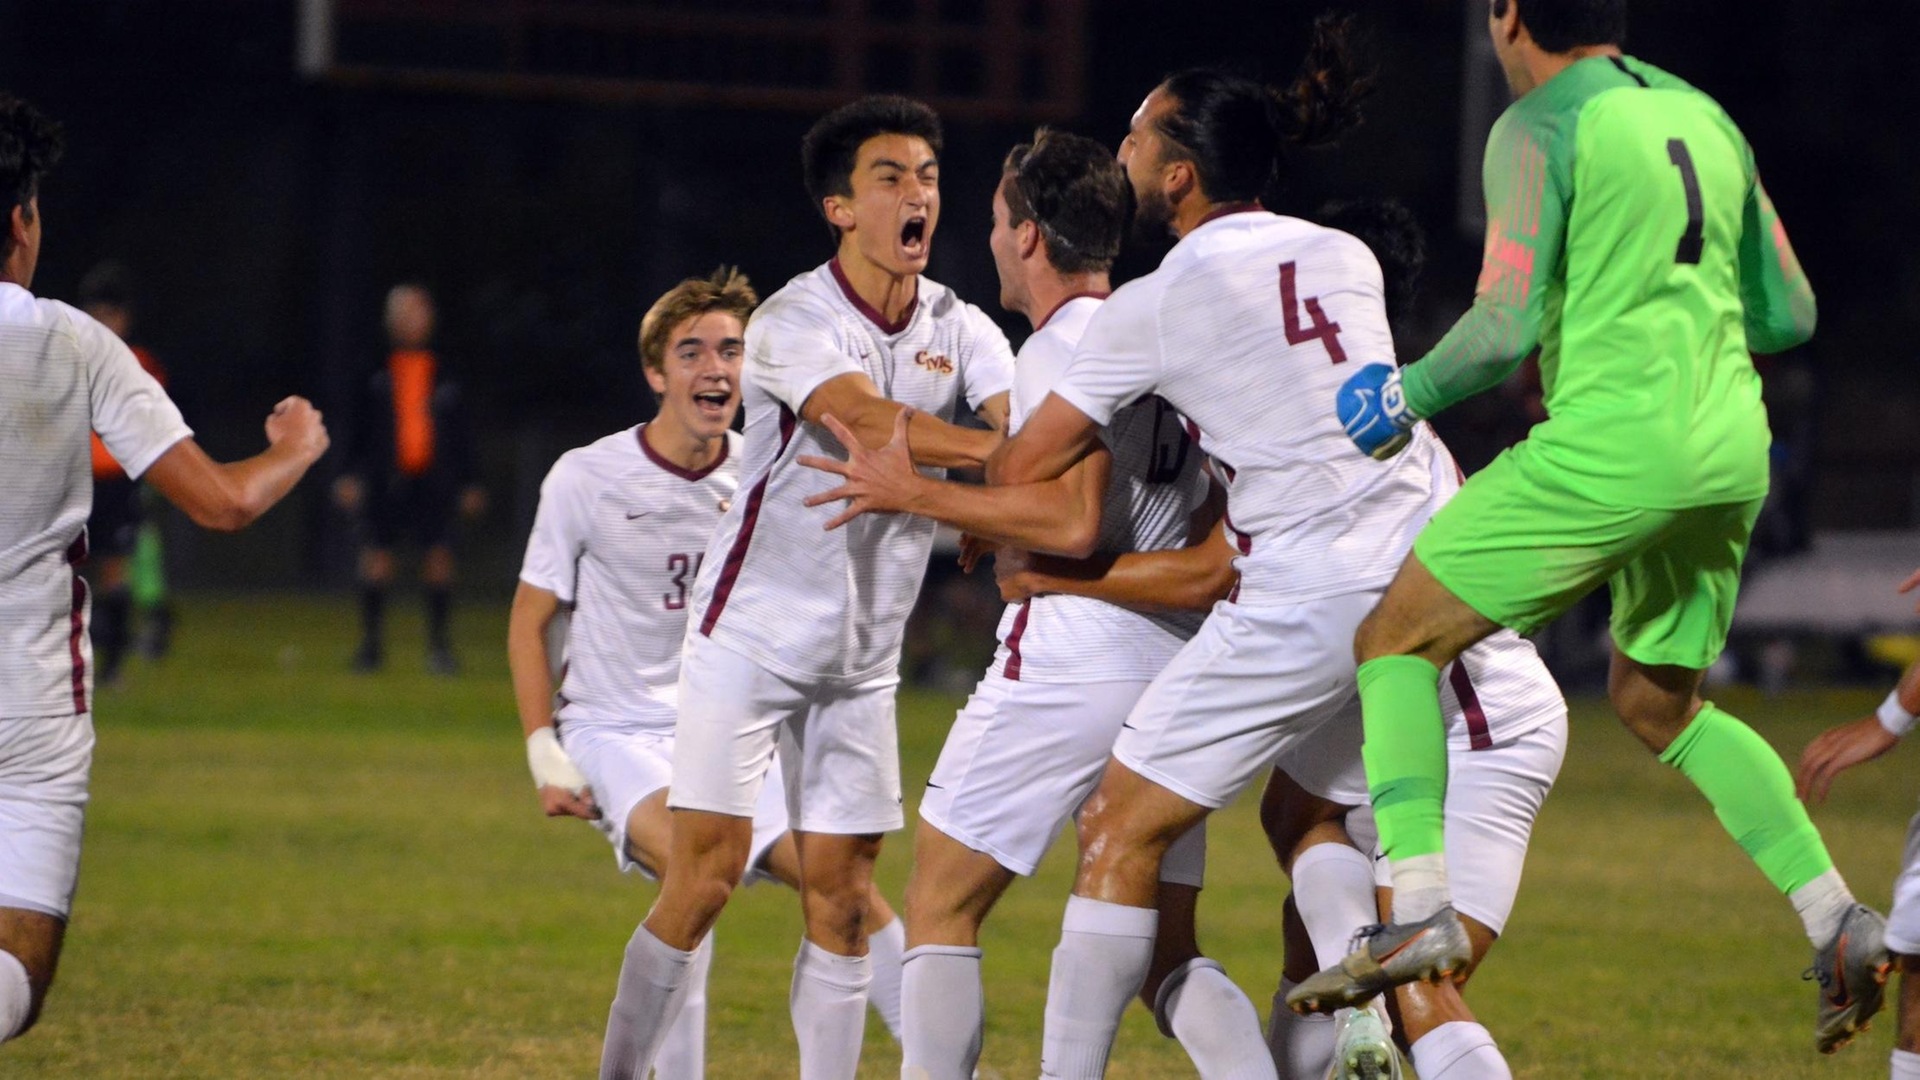 CMS celebrating a tying goal late in the SCIAC semis last year